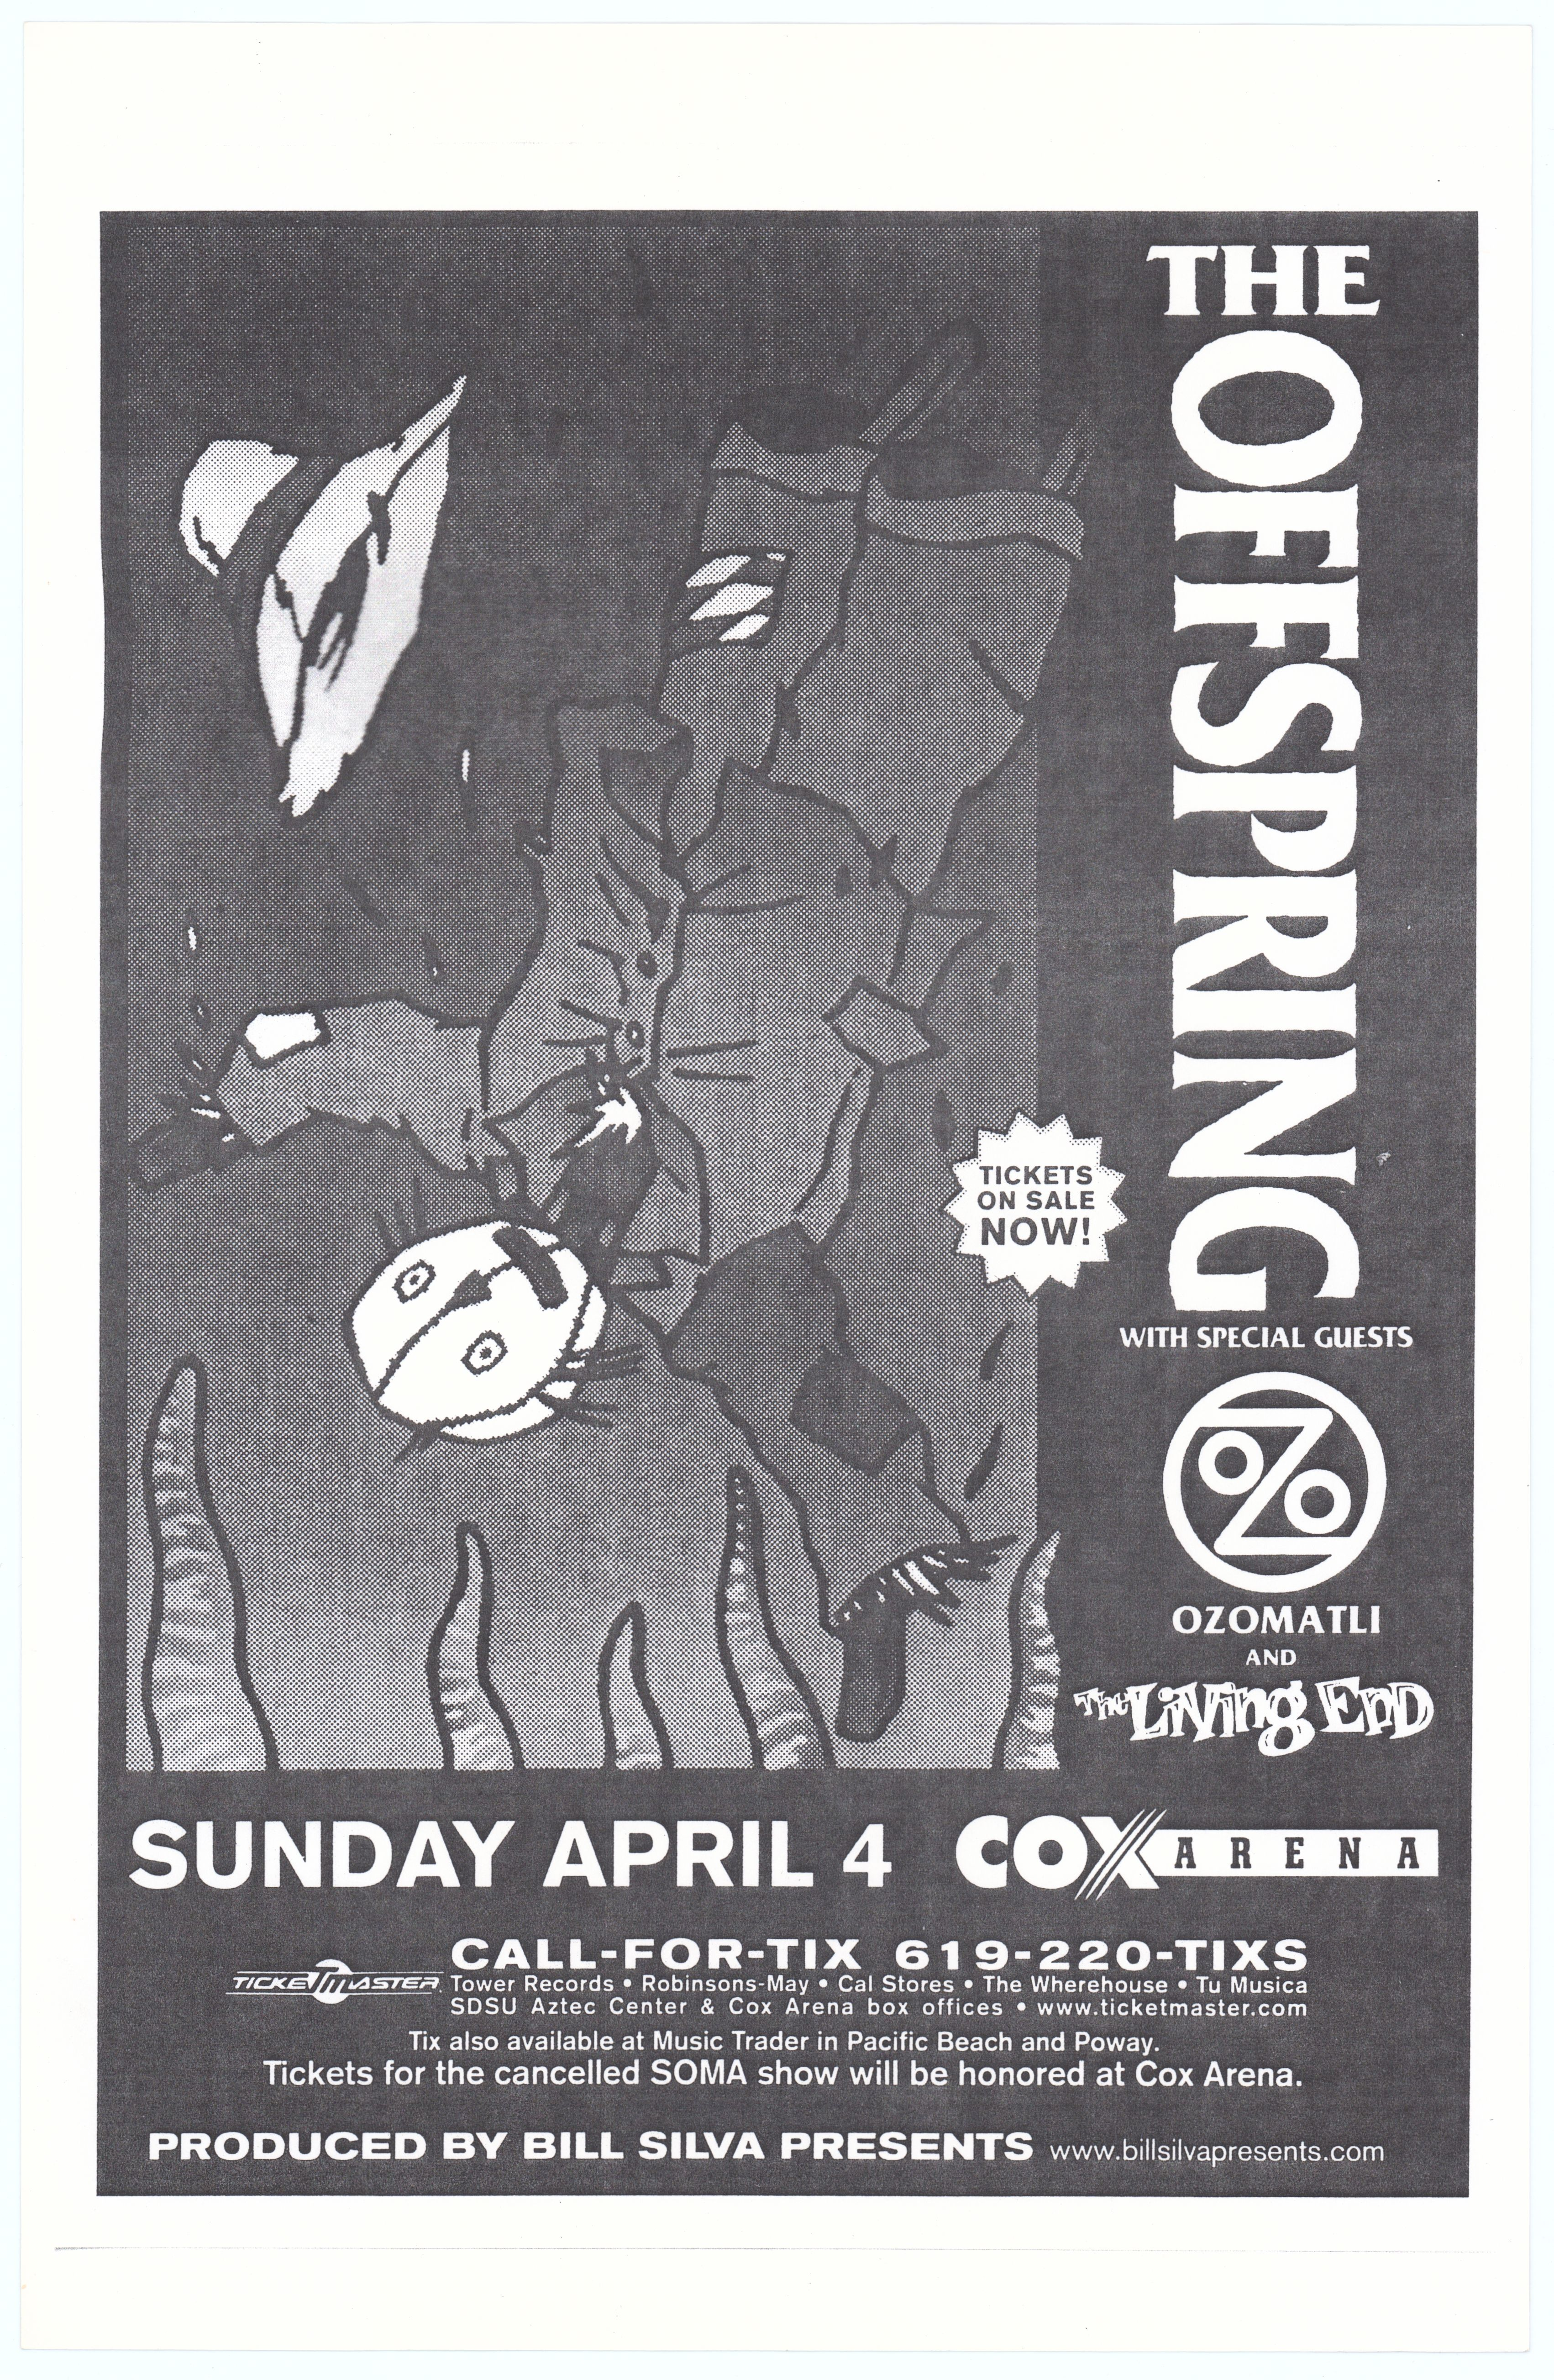 The Offspring & Ozomatli Cox Arena 1999 Concert Poster